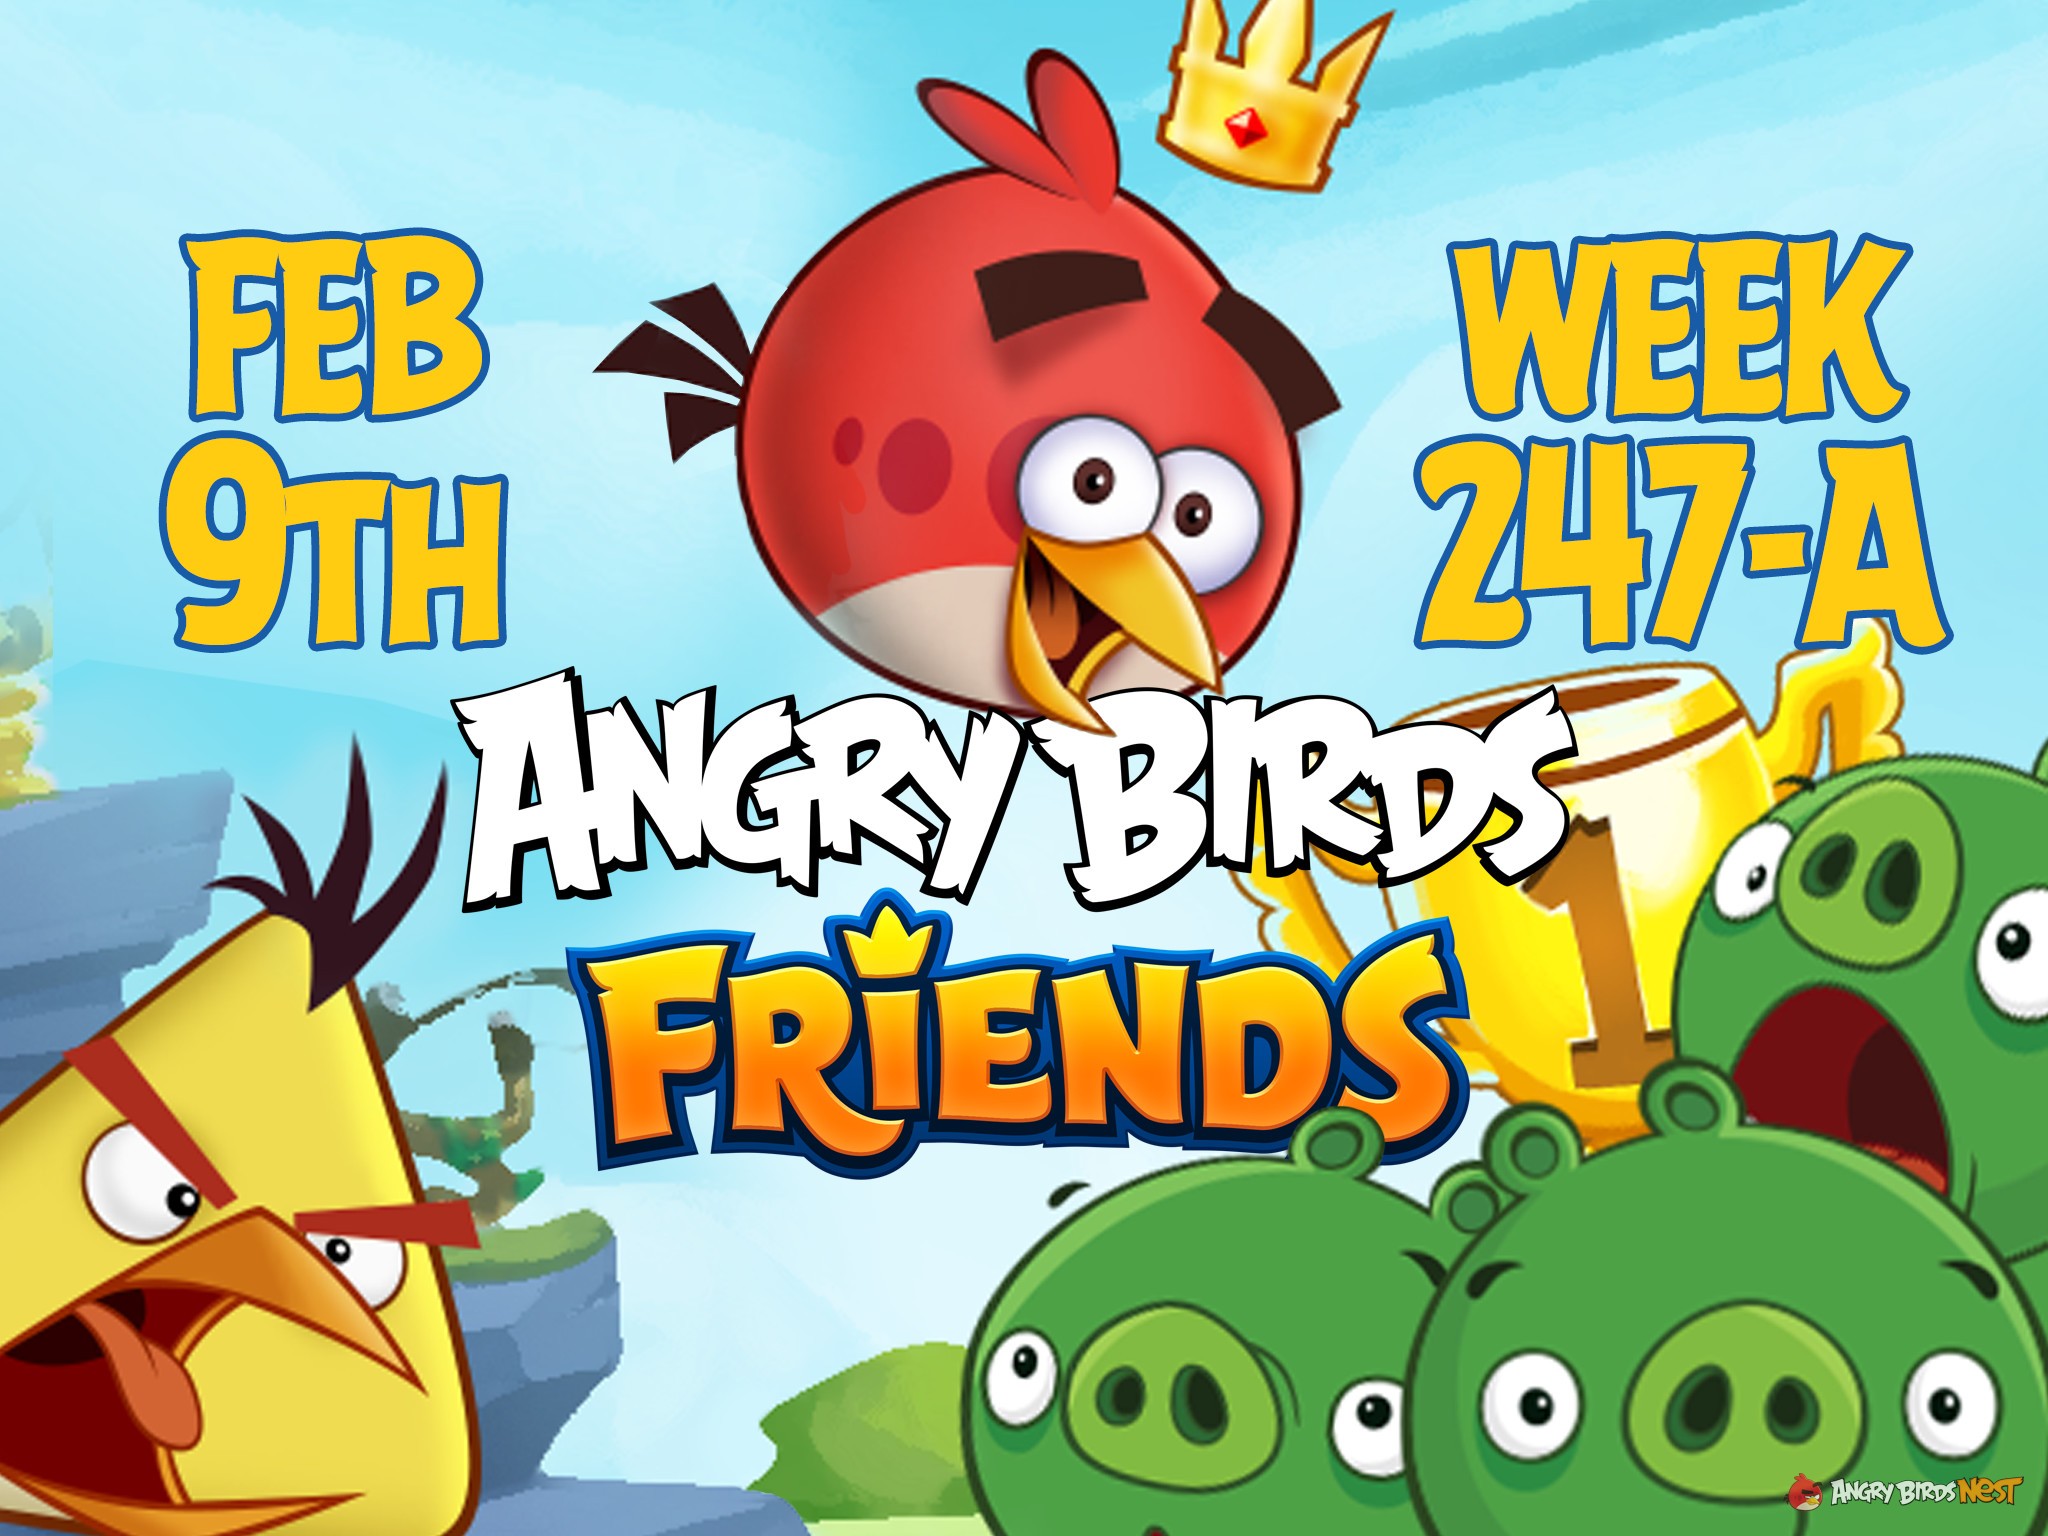 Angry Birds Friends Tournament Week 247-A Feature Image